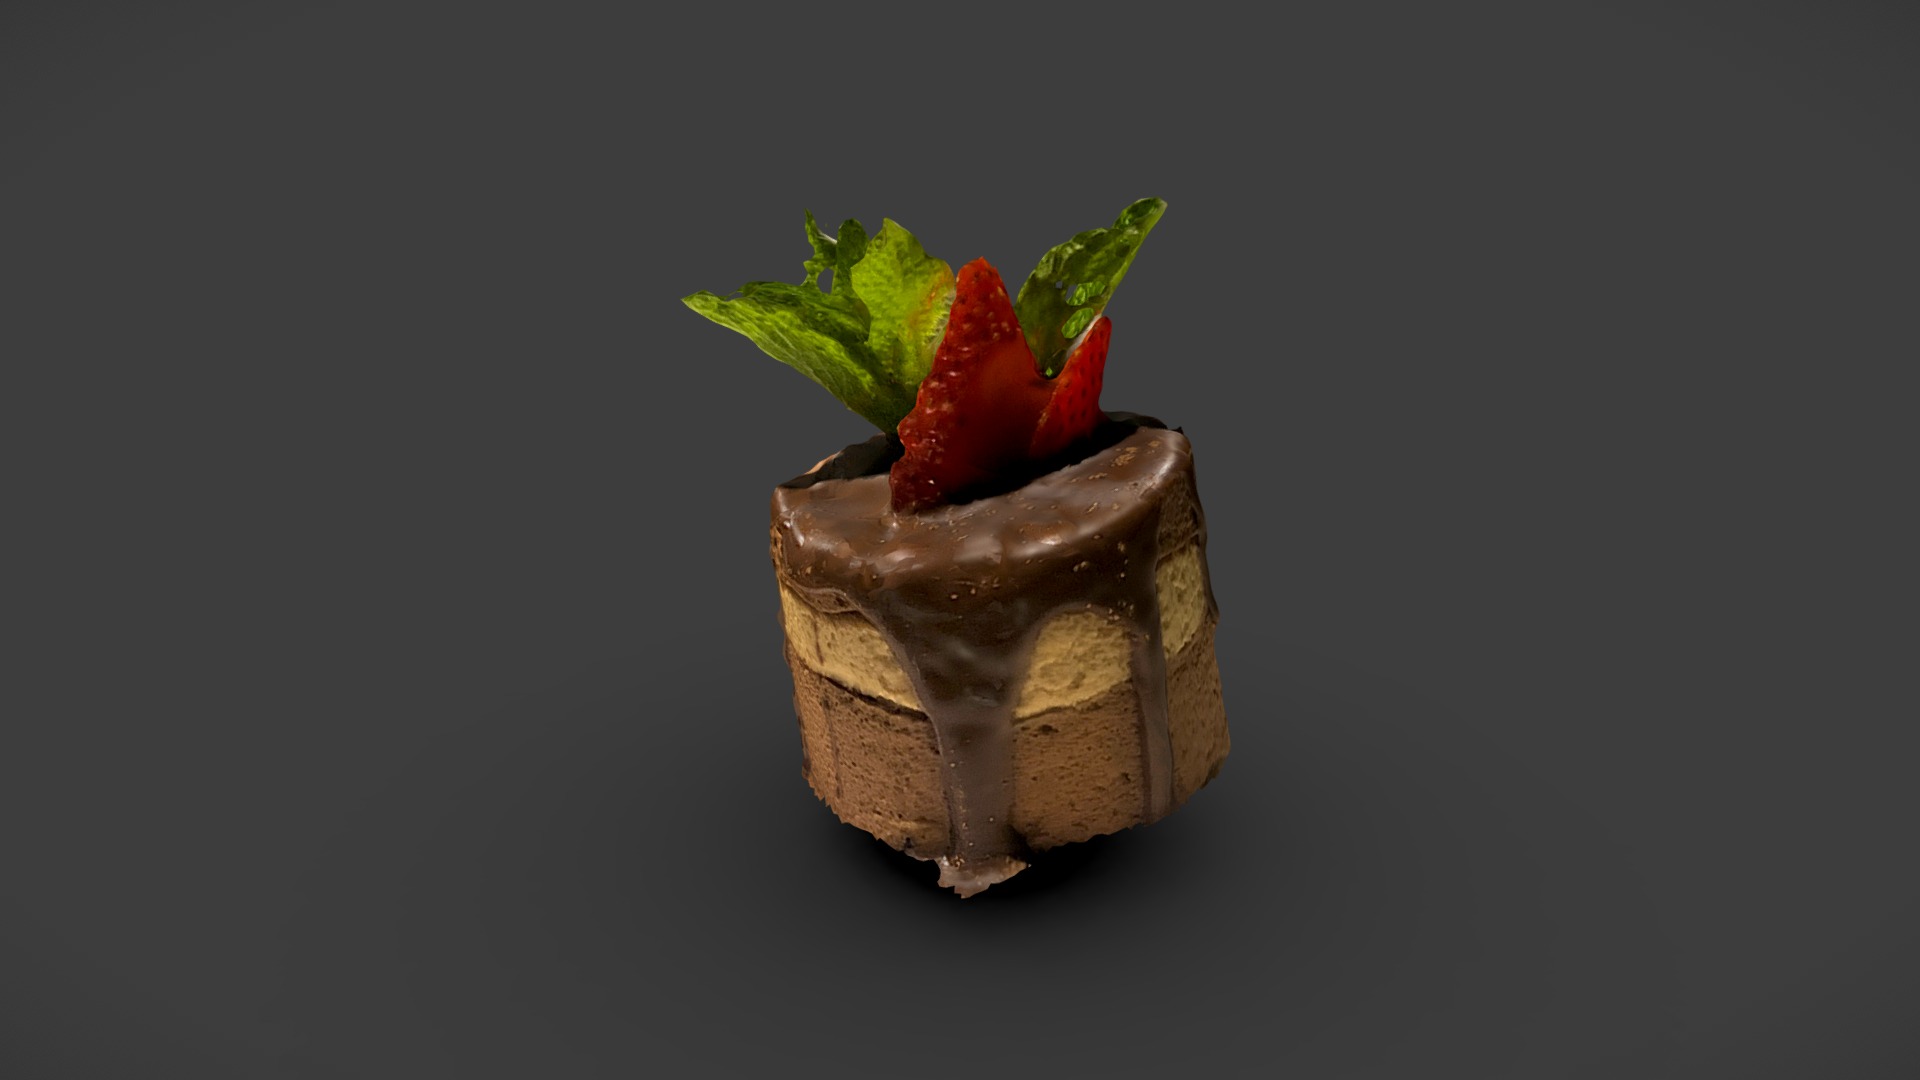 3D model Chocolate & Coffee Cake - This is a 3D model of the Chocolate & Coffee Cake. The 3D model is about a strawberry on a cupcake.